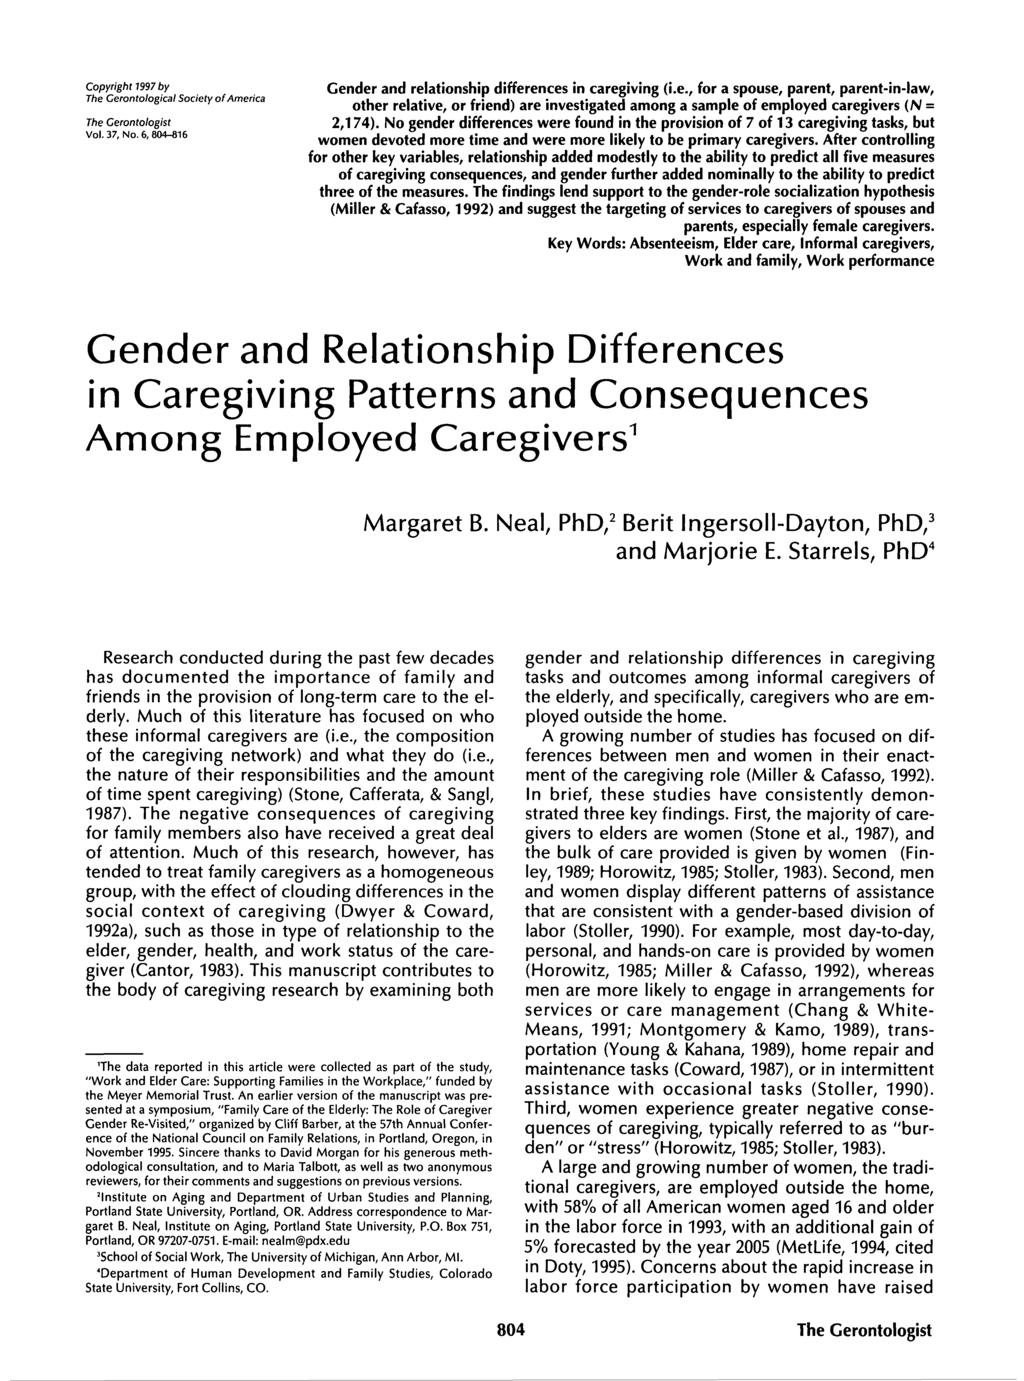 Copyright 1997 by The Cerontological Society of America The Cerontologist Vol. 37, No. 6, 804-816 Gender and relationship differences in caregiving (i.e., for a spouse, parent, parent-in-law, other relative, or friend) are investigated among a sample of employed caregivers (N = 2,174).